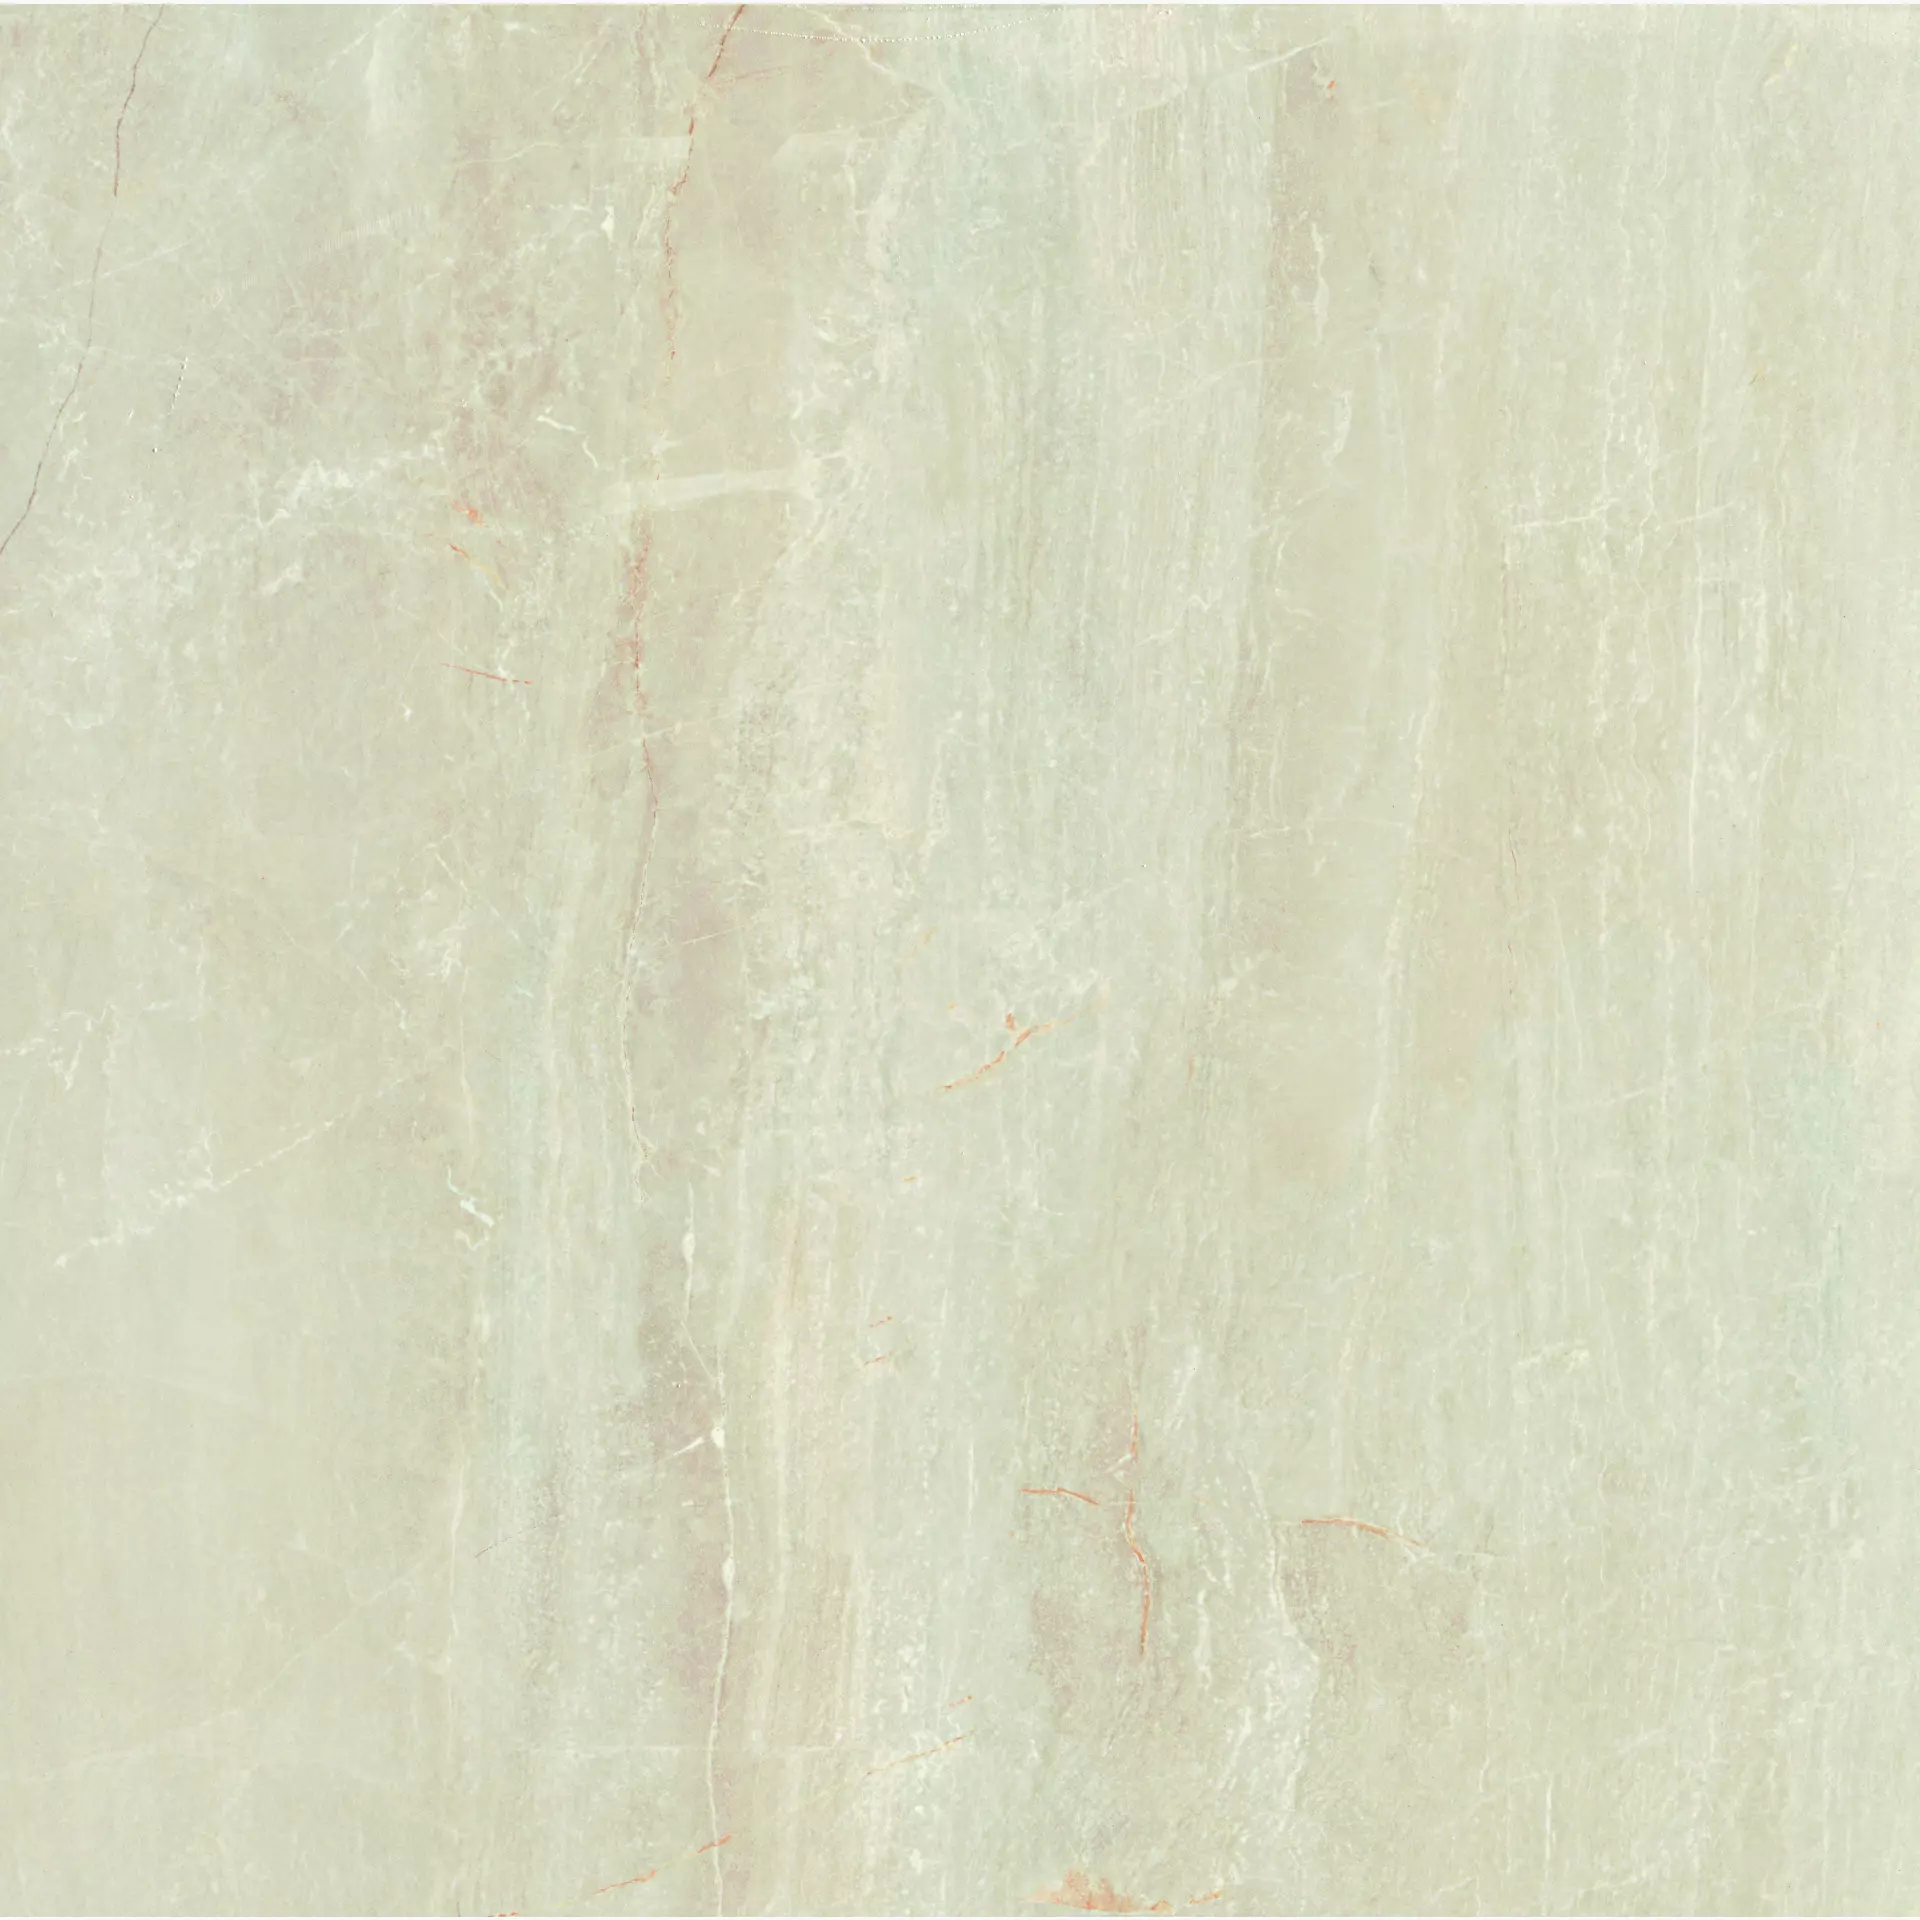 Serenissima Fossil Crema Lux 1066575 60x60cm rectified 9,5mm